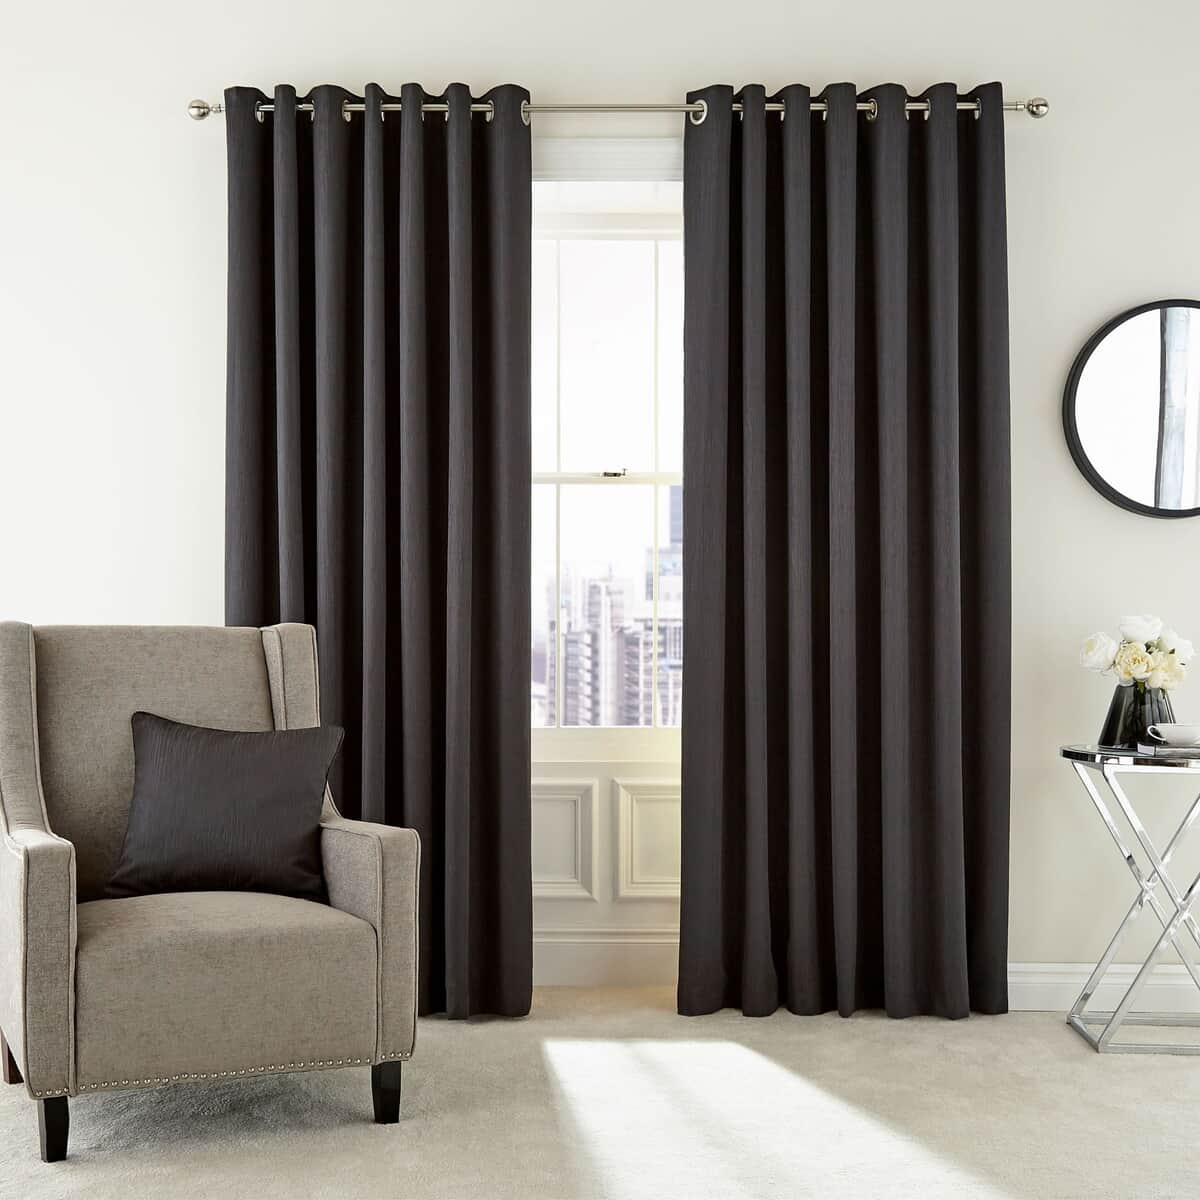 Peacock Blue Hotel Barcelo Graphite Curtains large